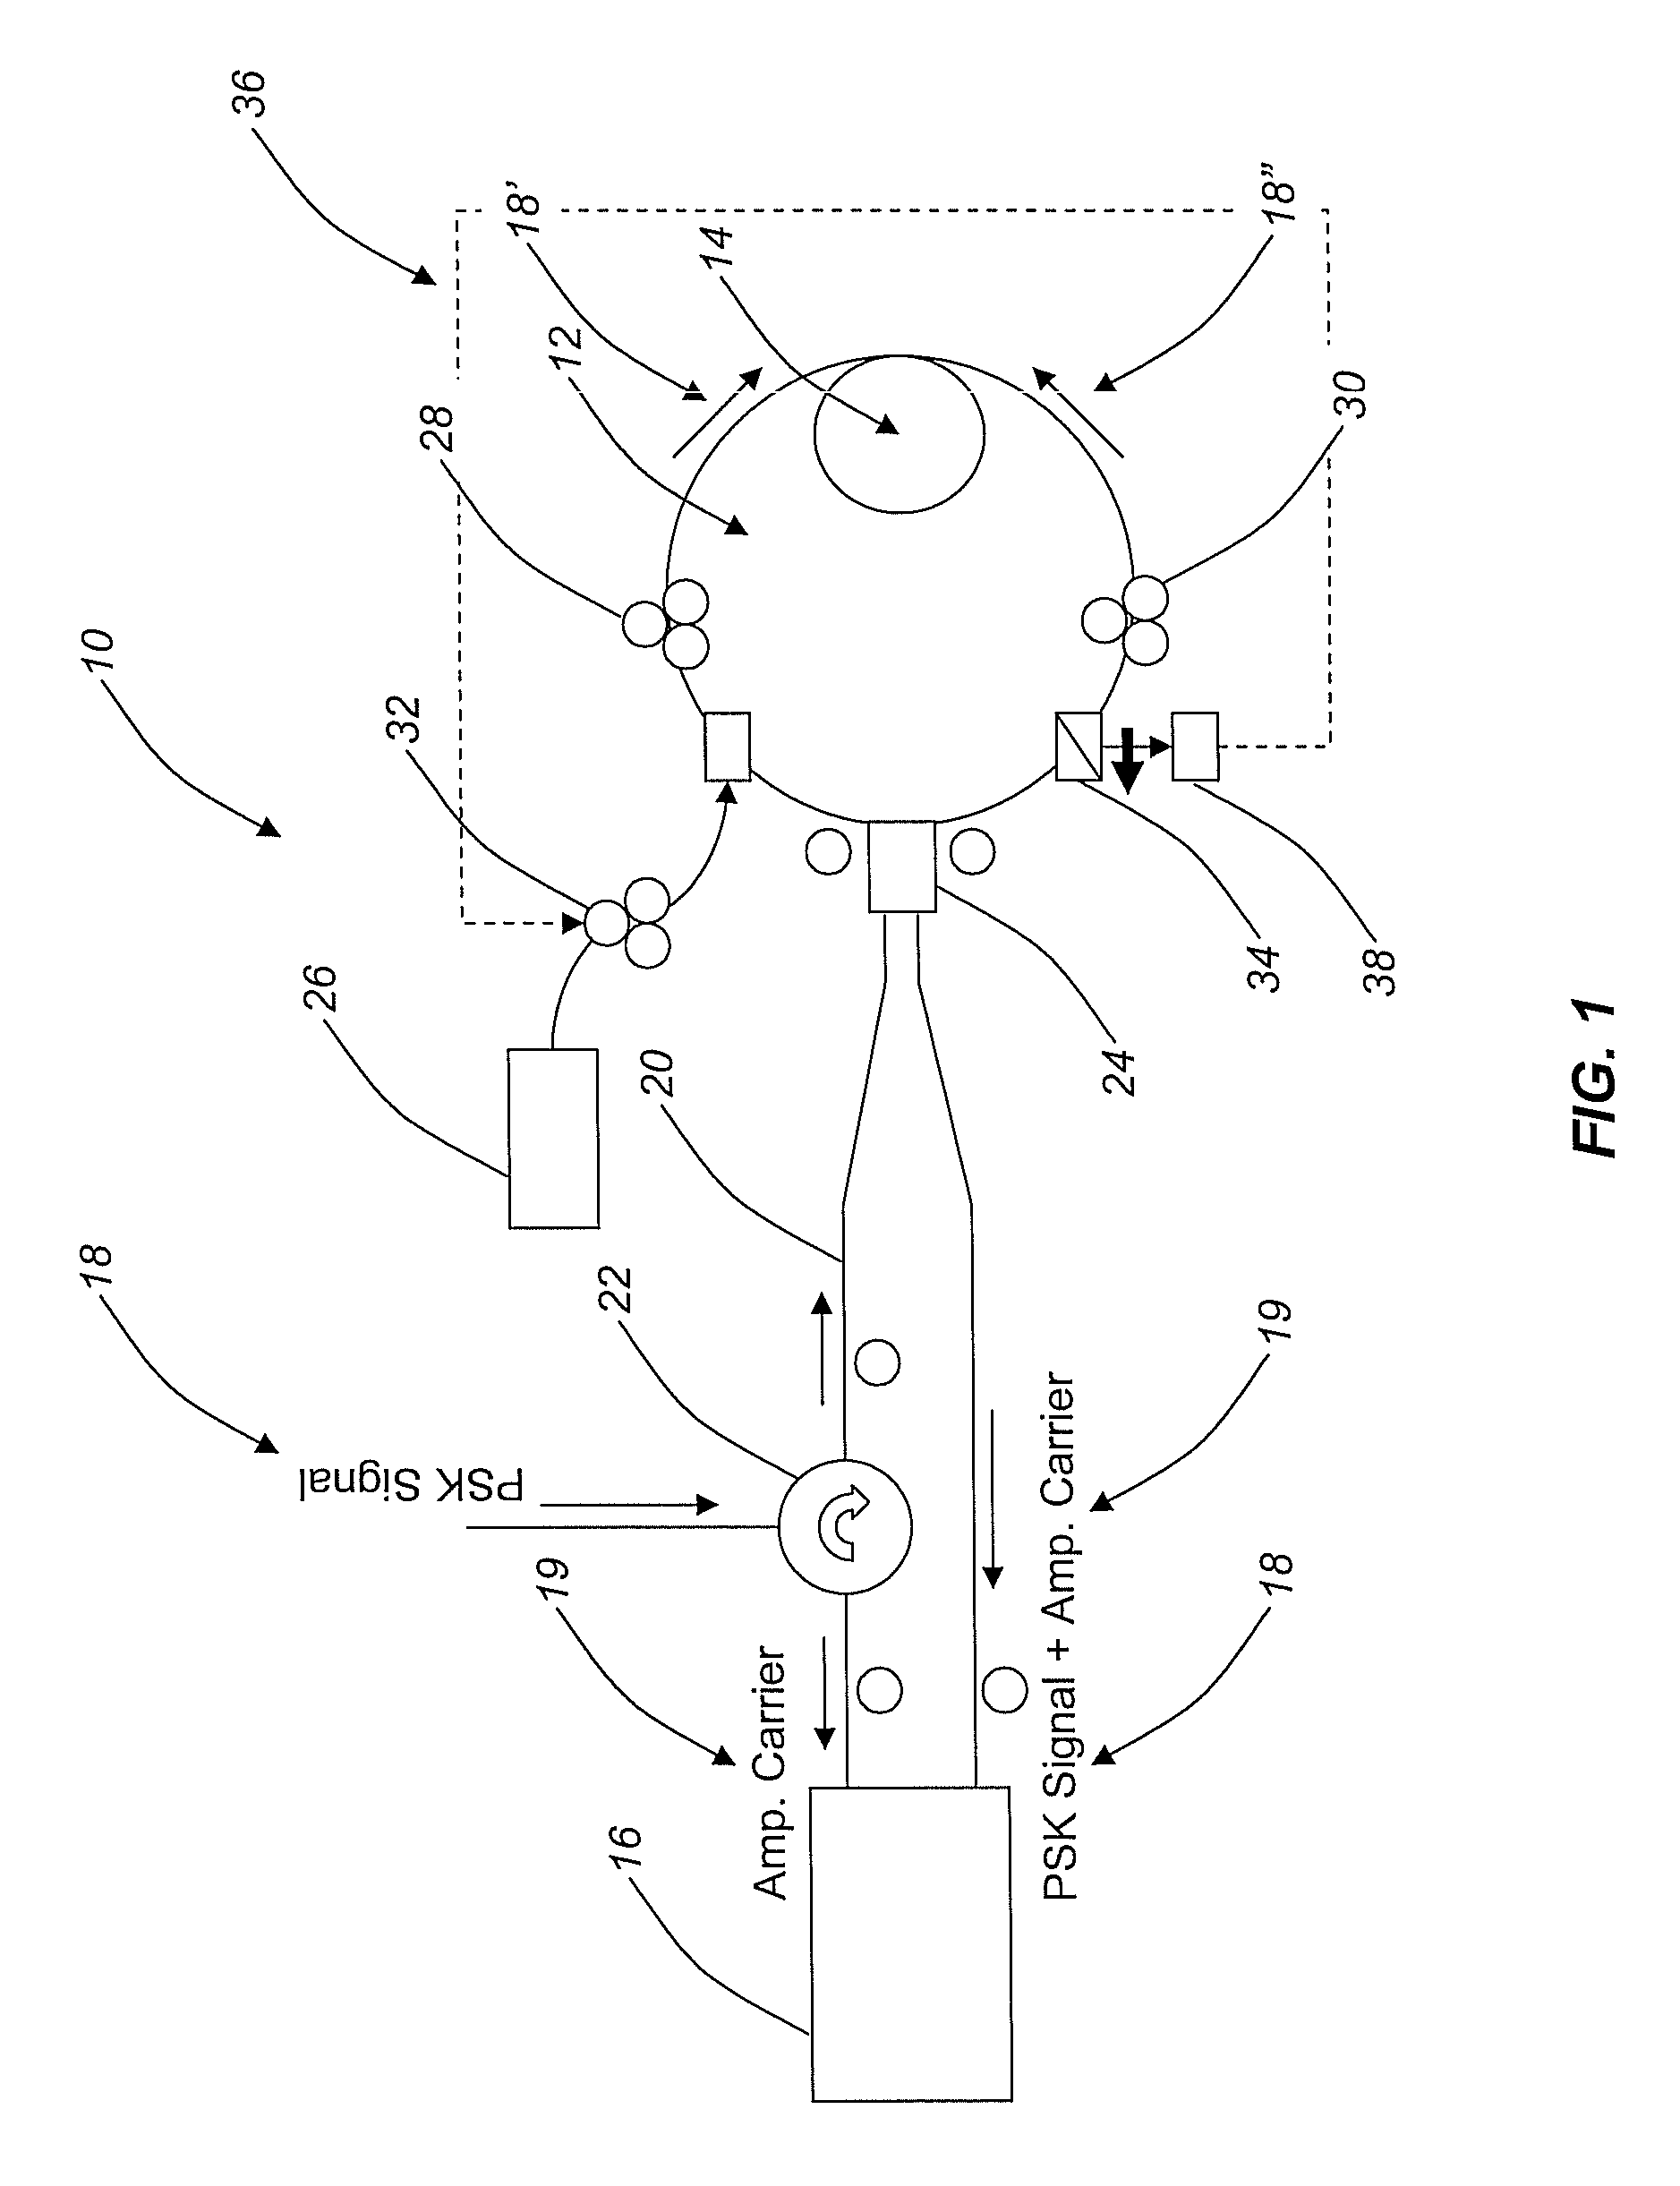 Systems and methods for the coherent non-differential detection of optical communication signals